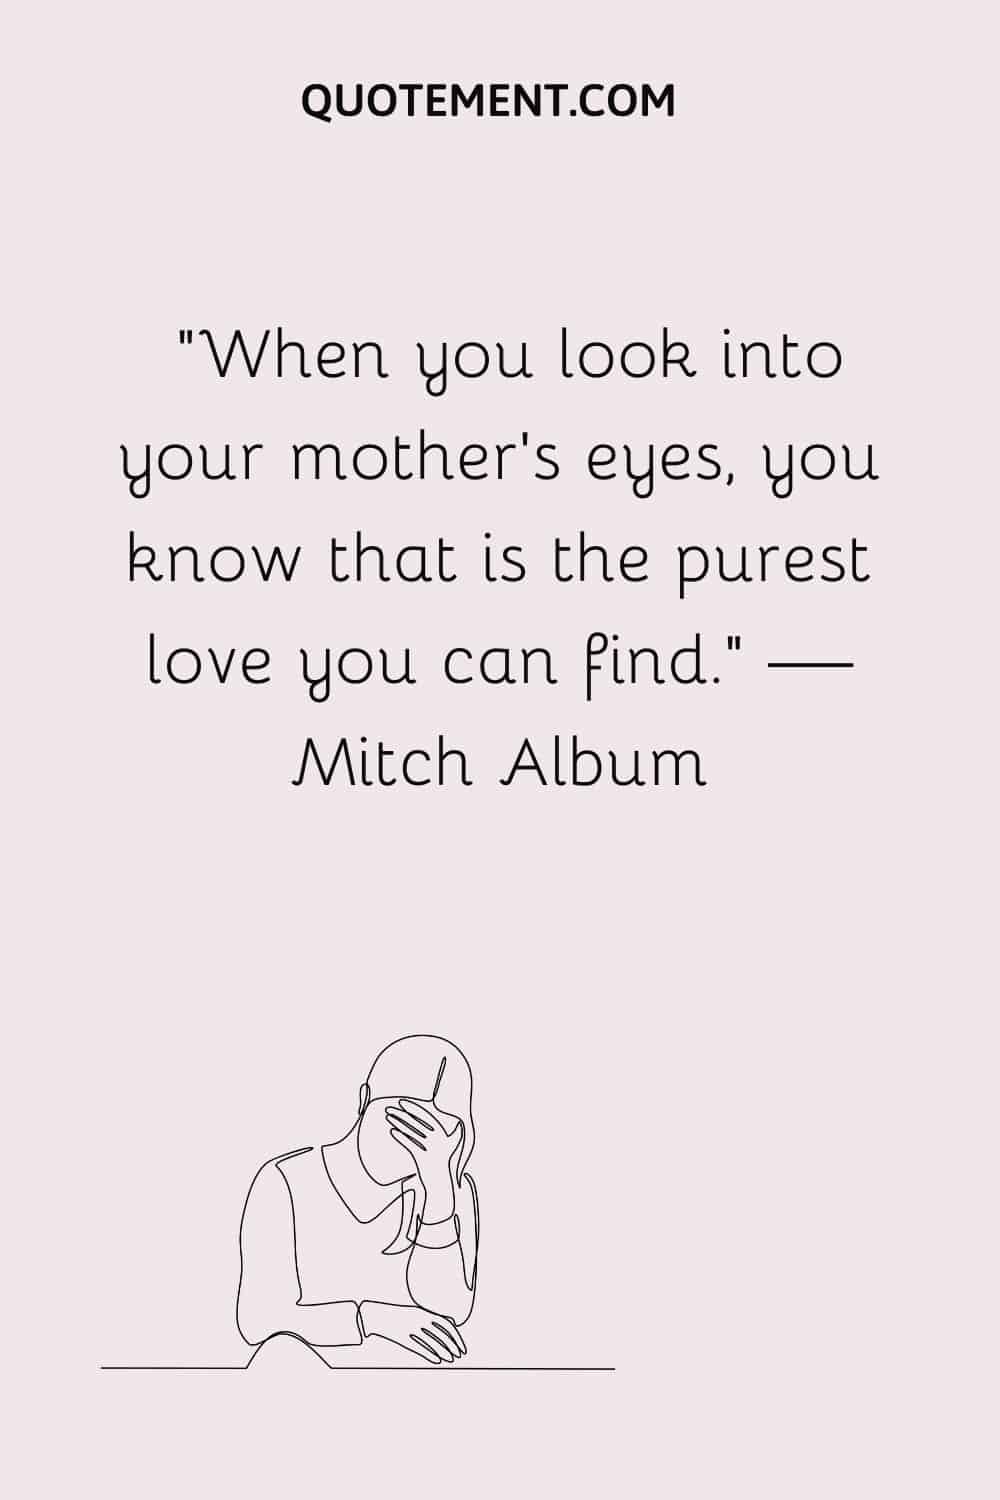 When you look into your mother’s eyes, you know that is the purest love you can find.